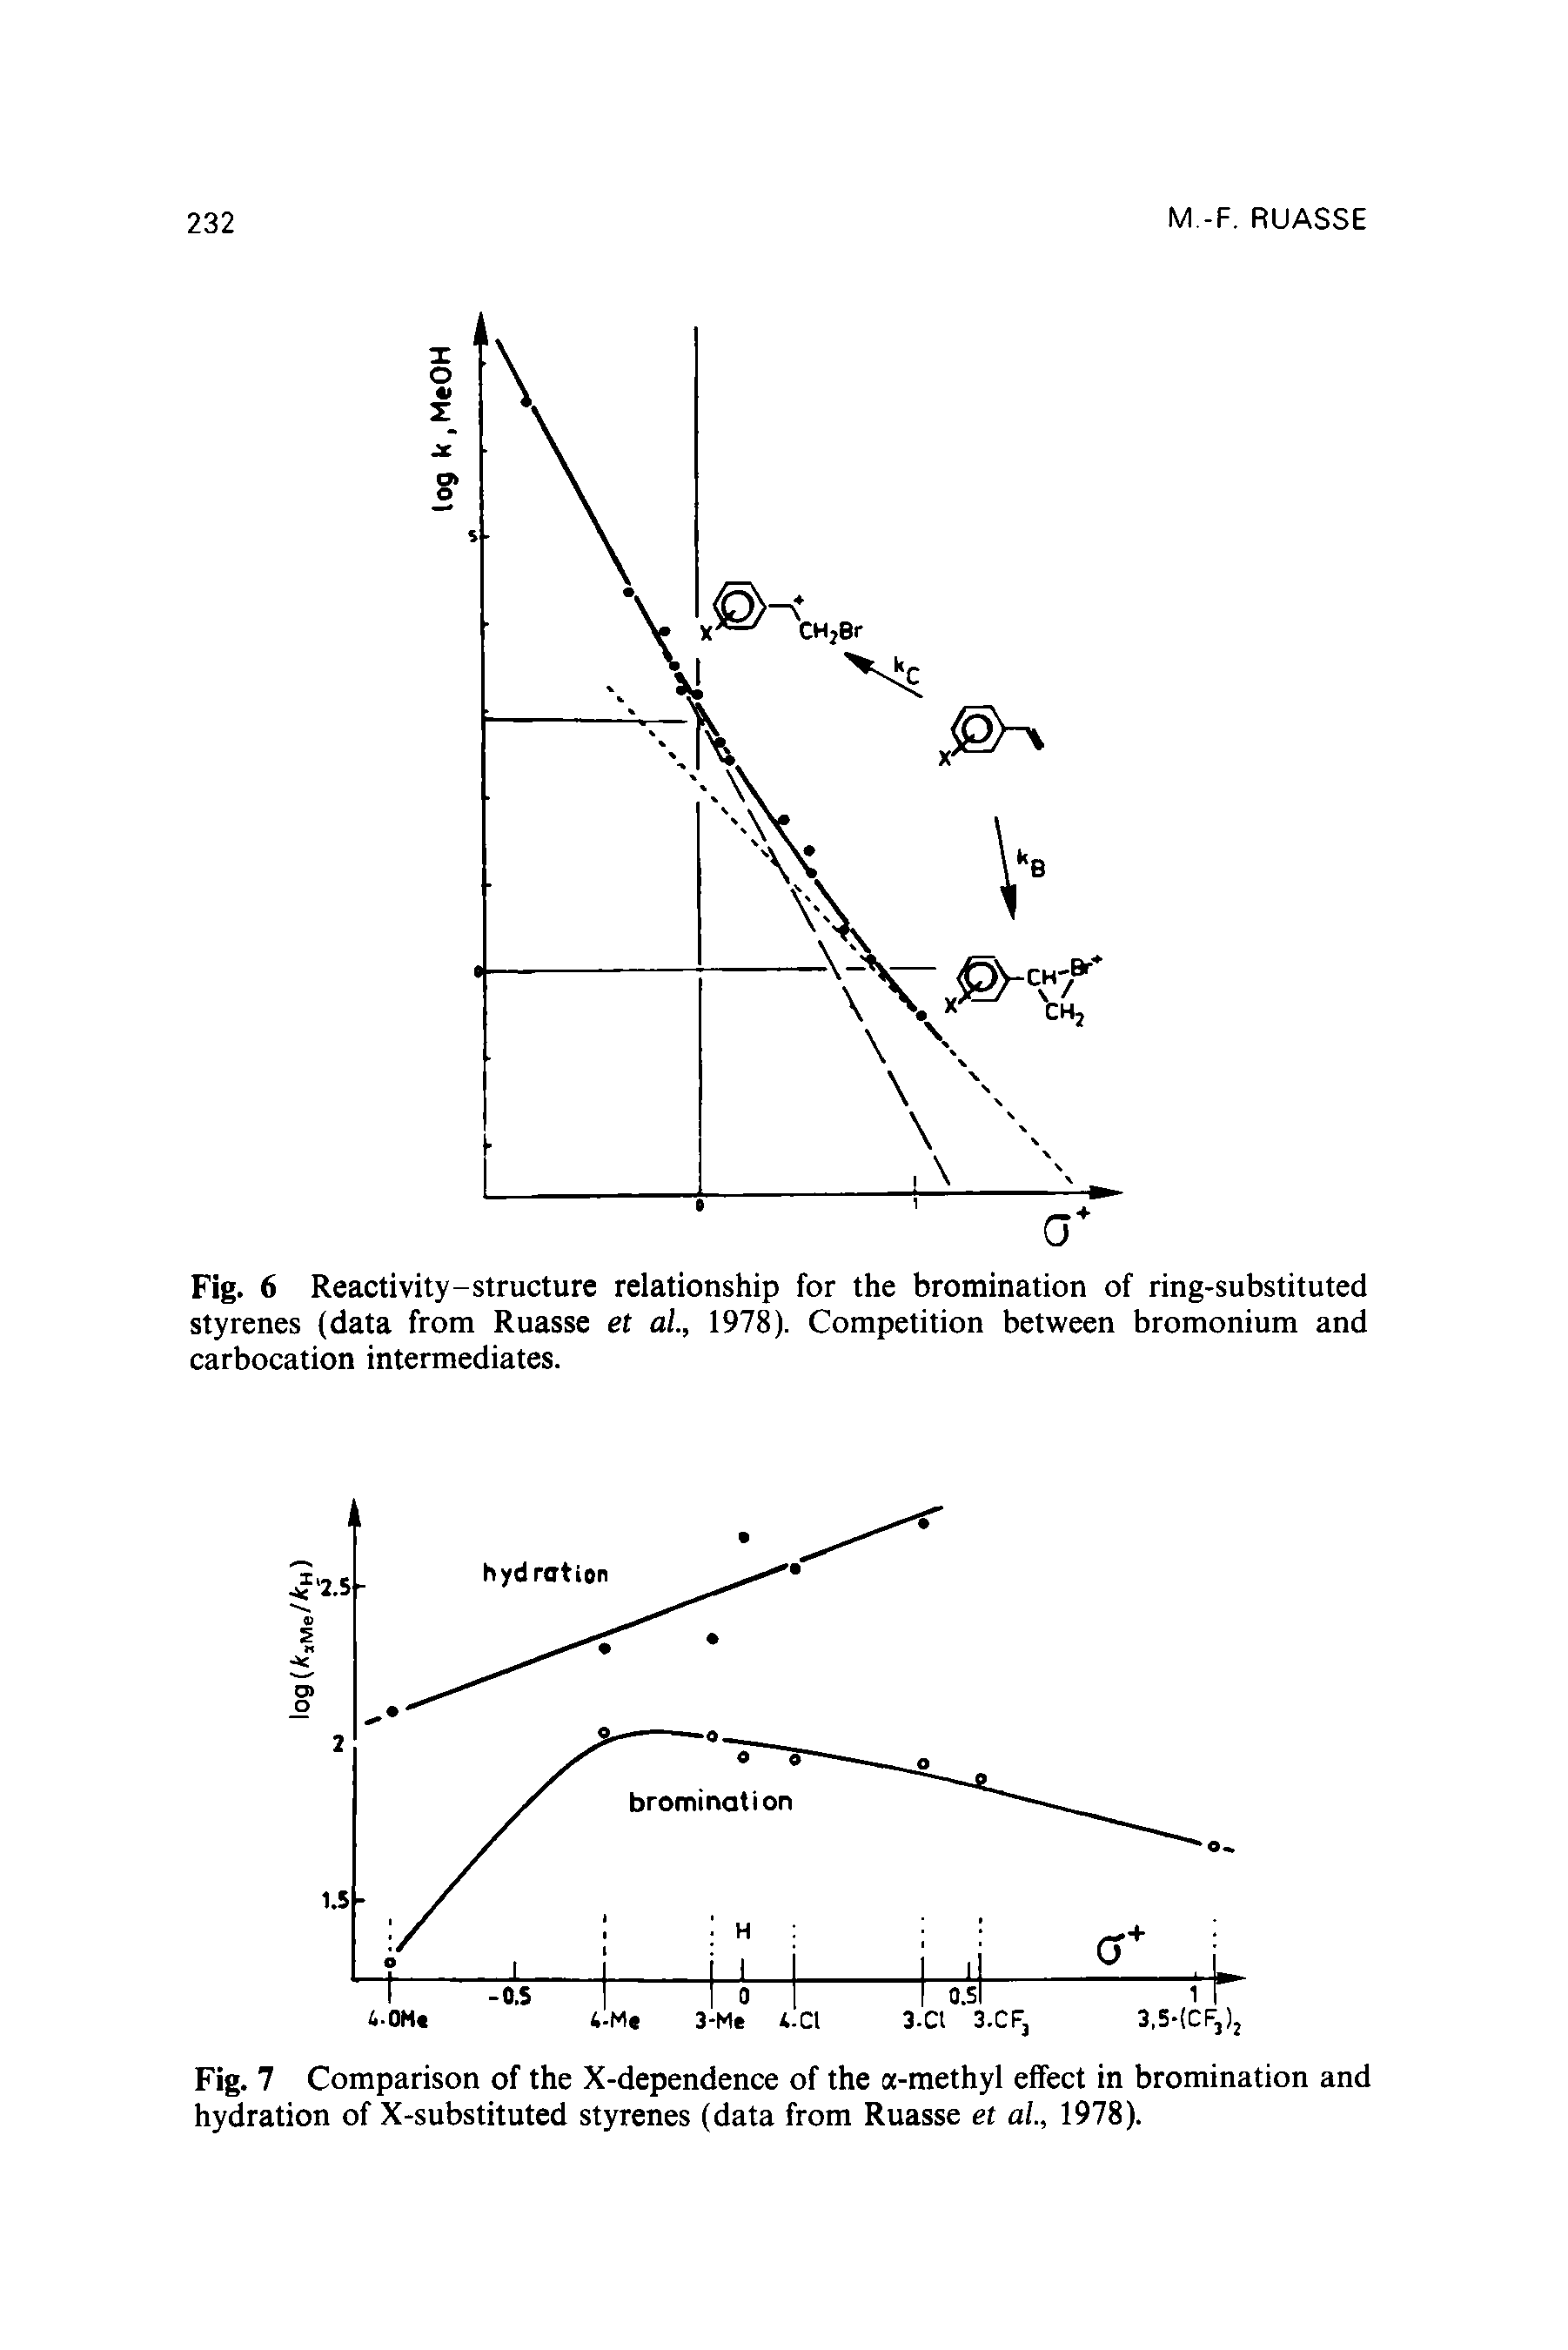 Fig. 7 Comparison of the X-dependence of the a-methyl effect in bromination and hydration of X-substituted styrenes (data from Ruasse et al, 1978).